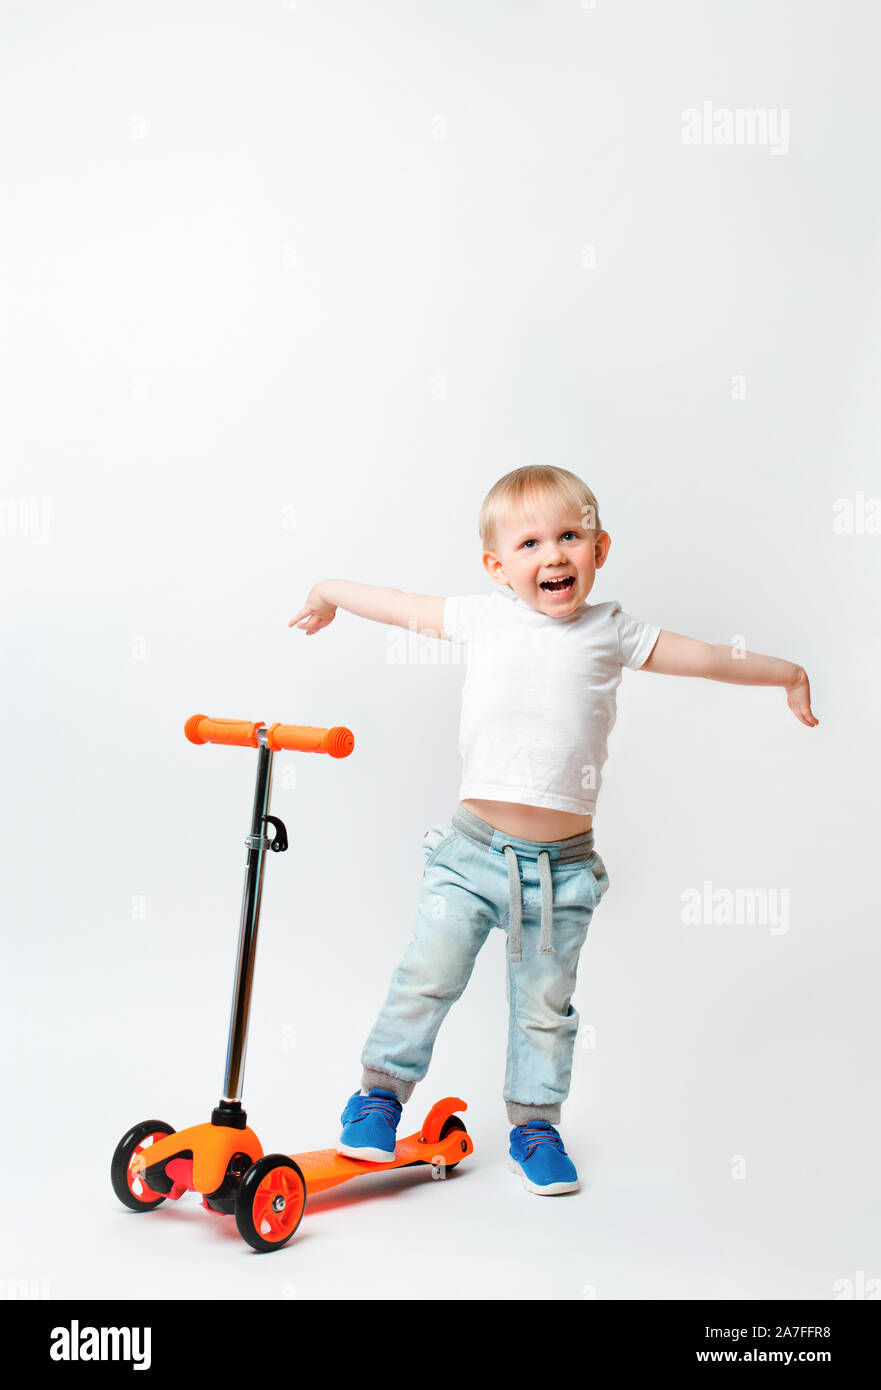 Toddler, a very joyful child, raised his hands in awe of the scooter's gift. Concept for advertising and articles about toys and bicycles on a white b Stock Photo